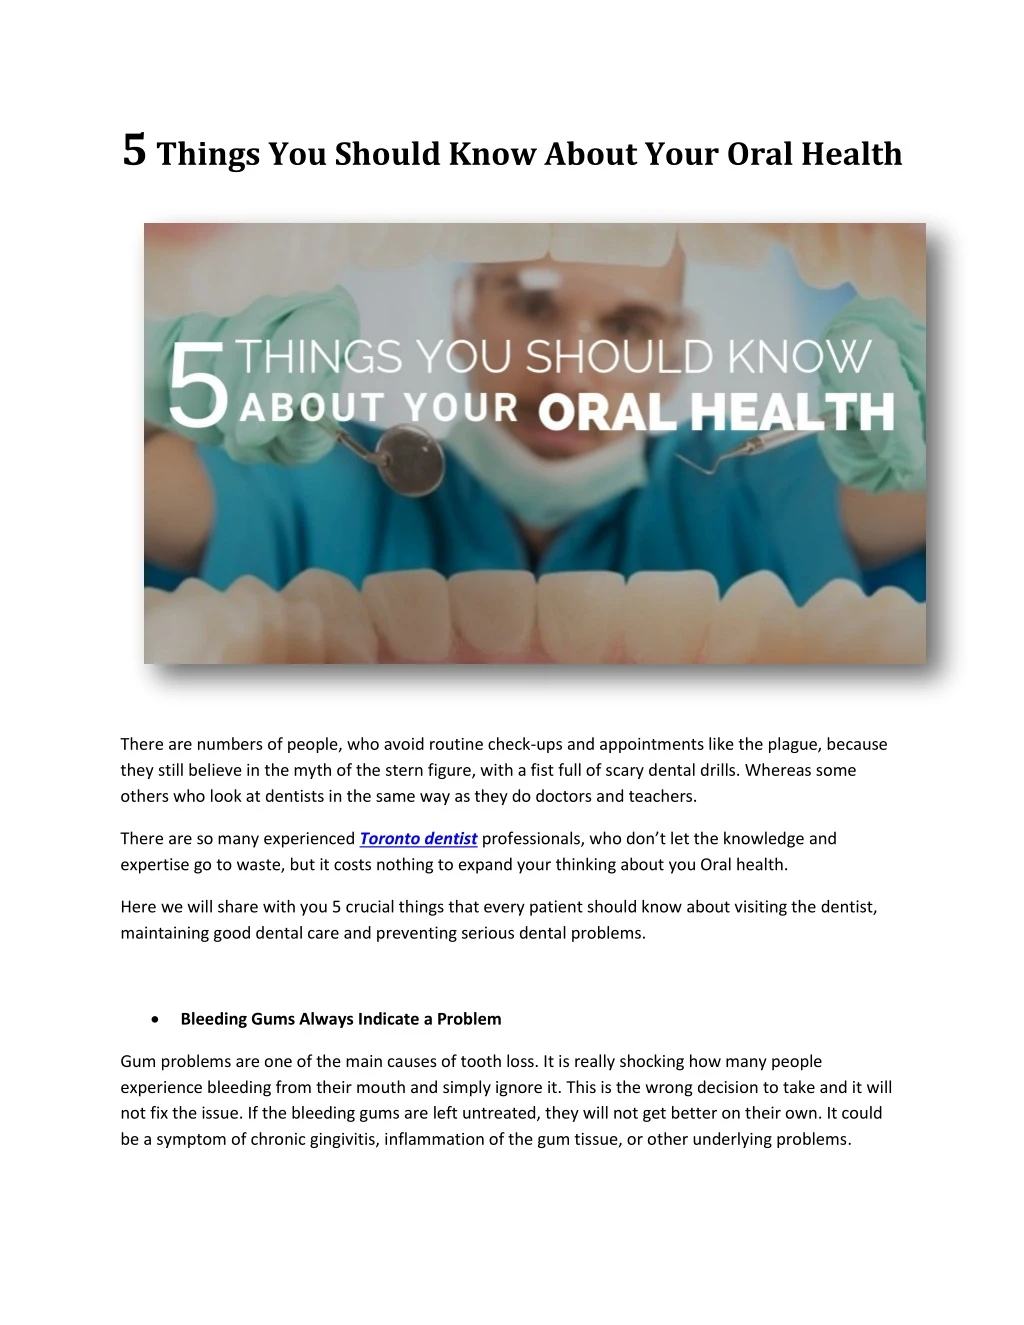 5 things you should know about your oral health